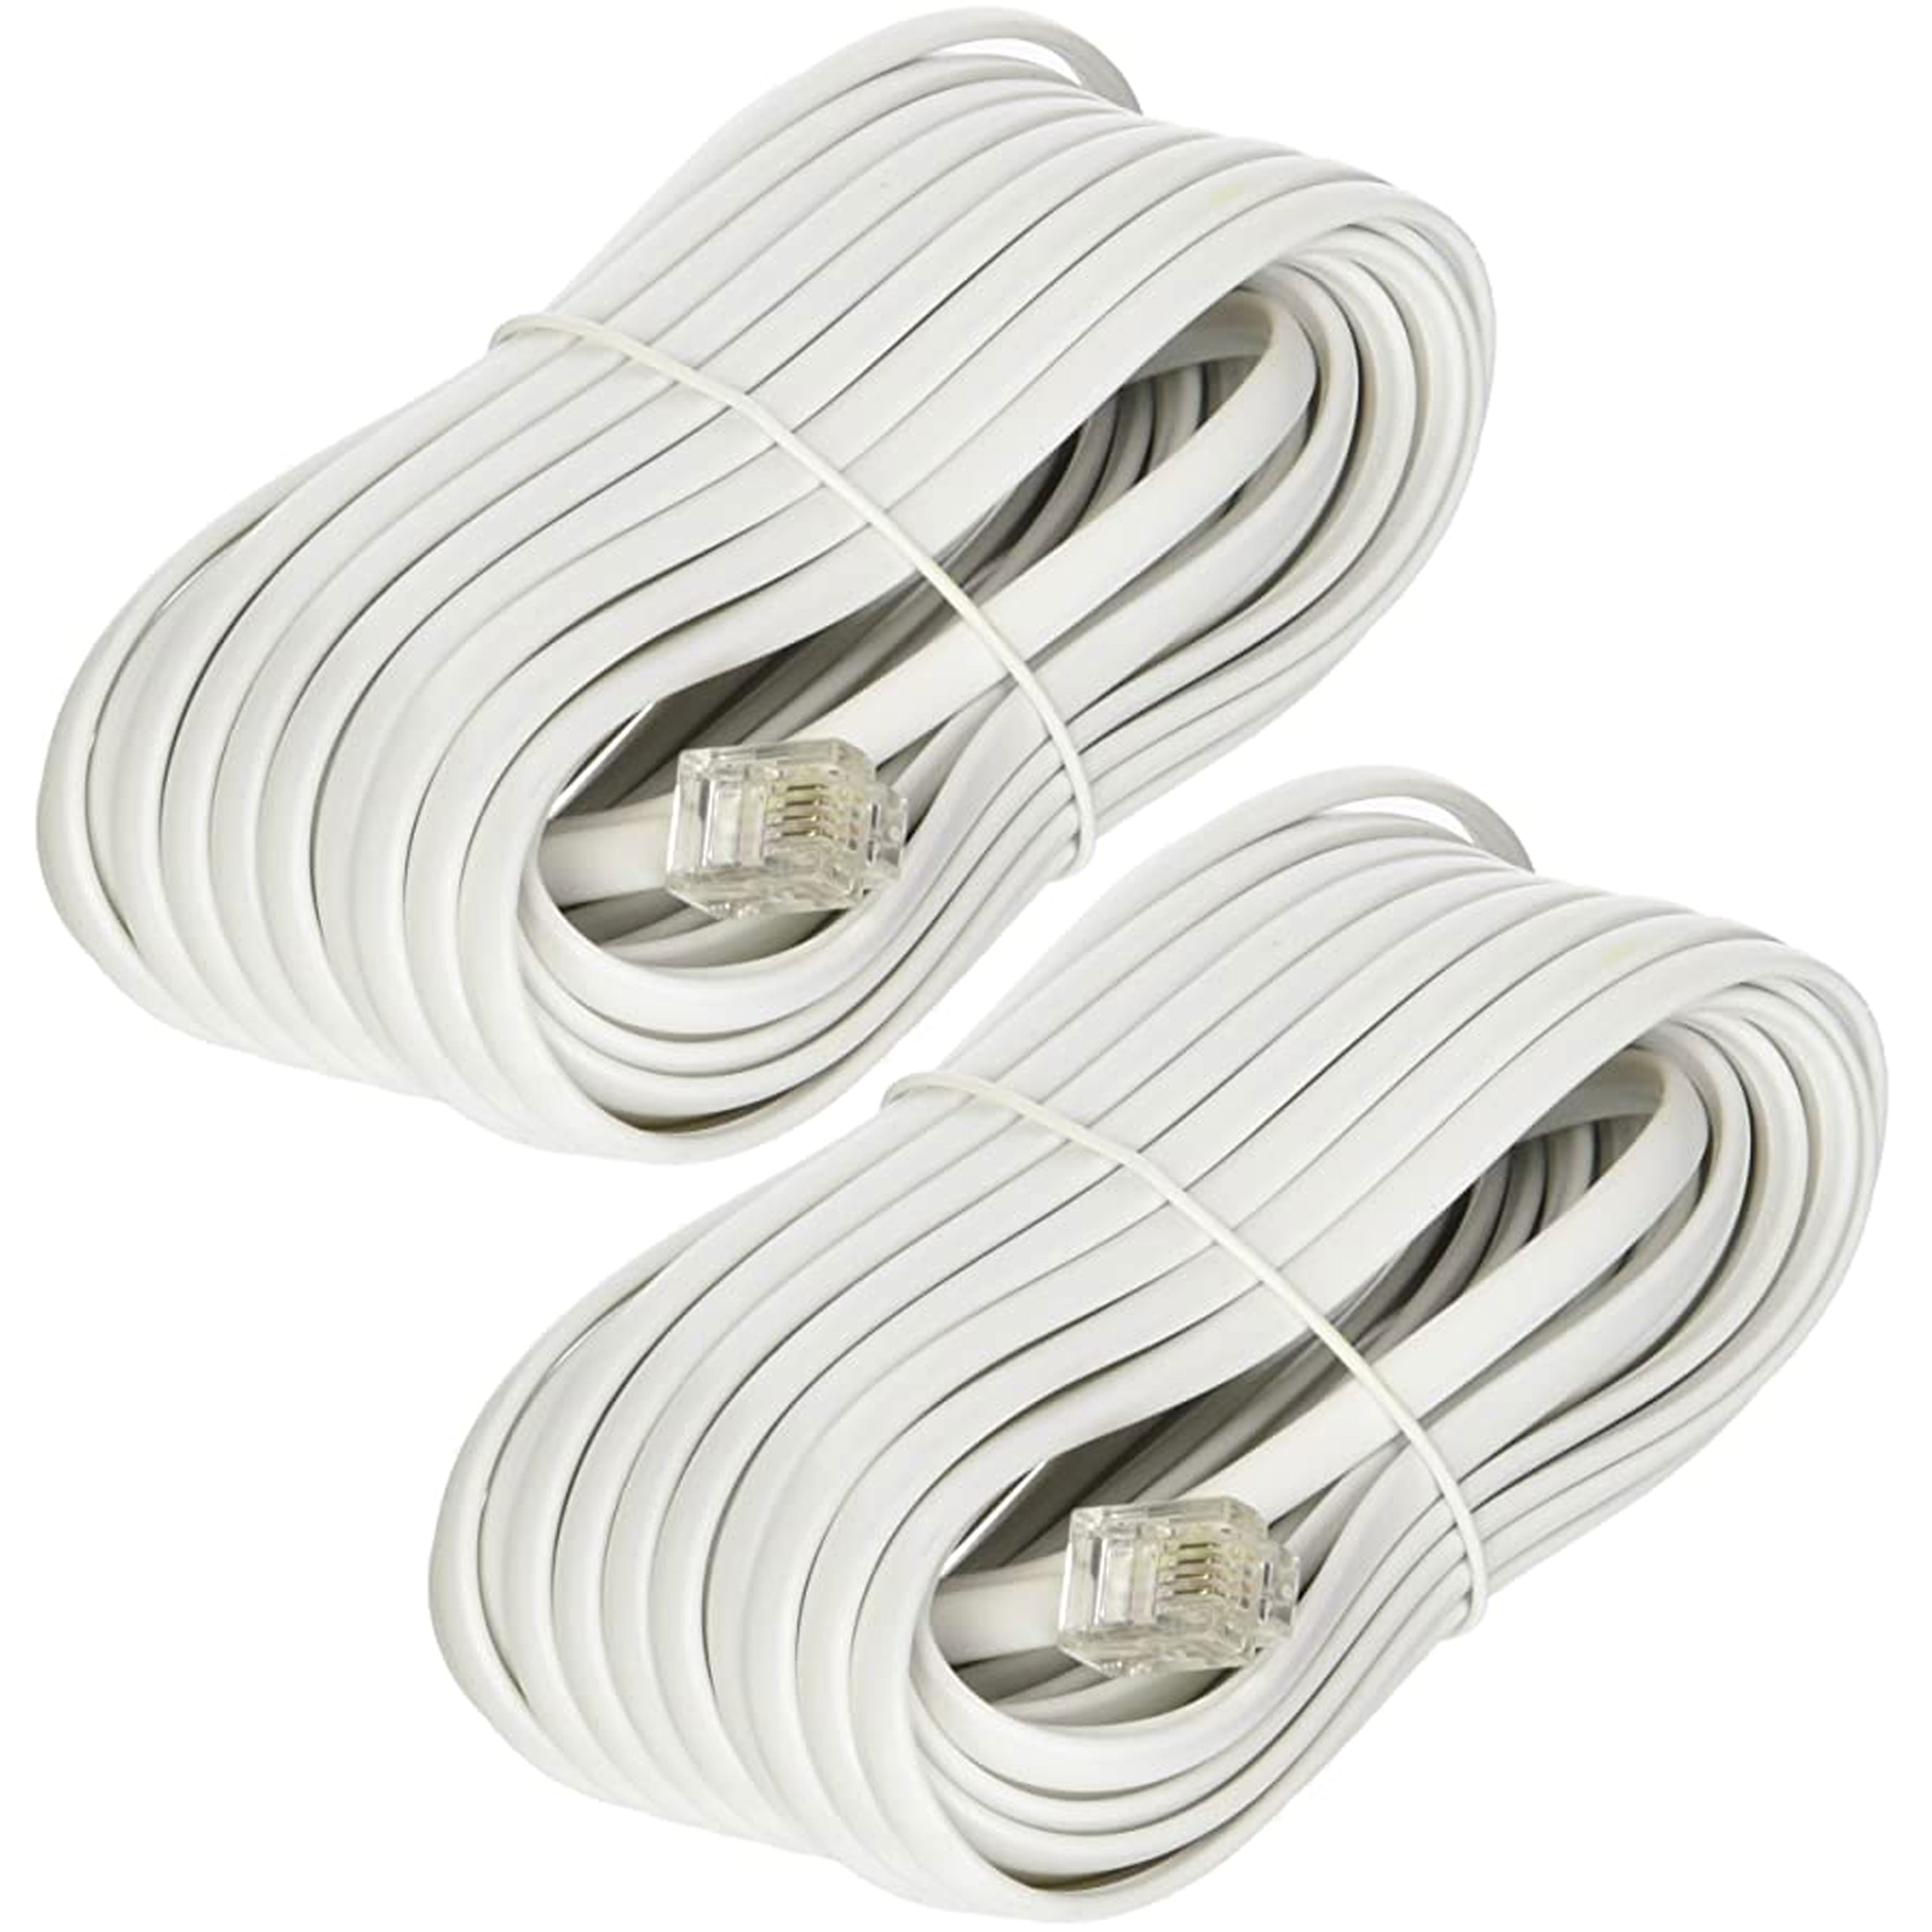 25 FT 25FT Feet RJ11 4C Modular Telephone Extension Phone Cord Cable Line Wire 